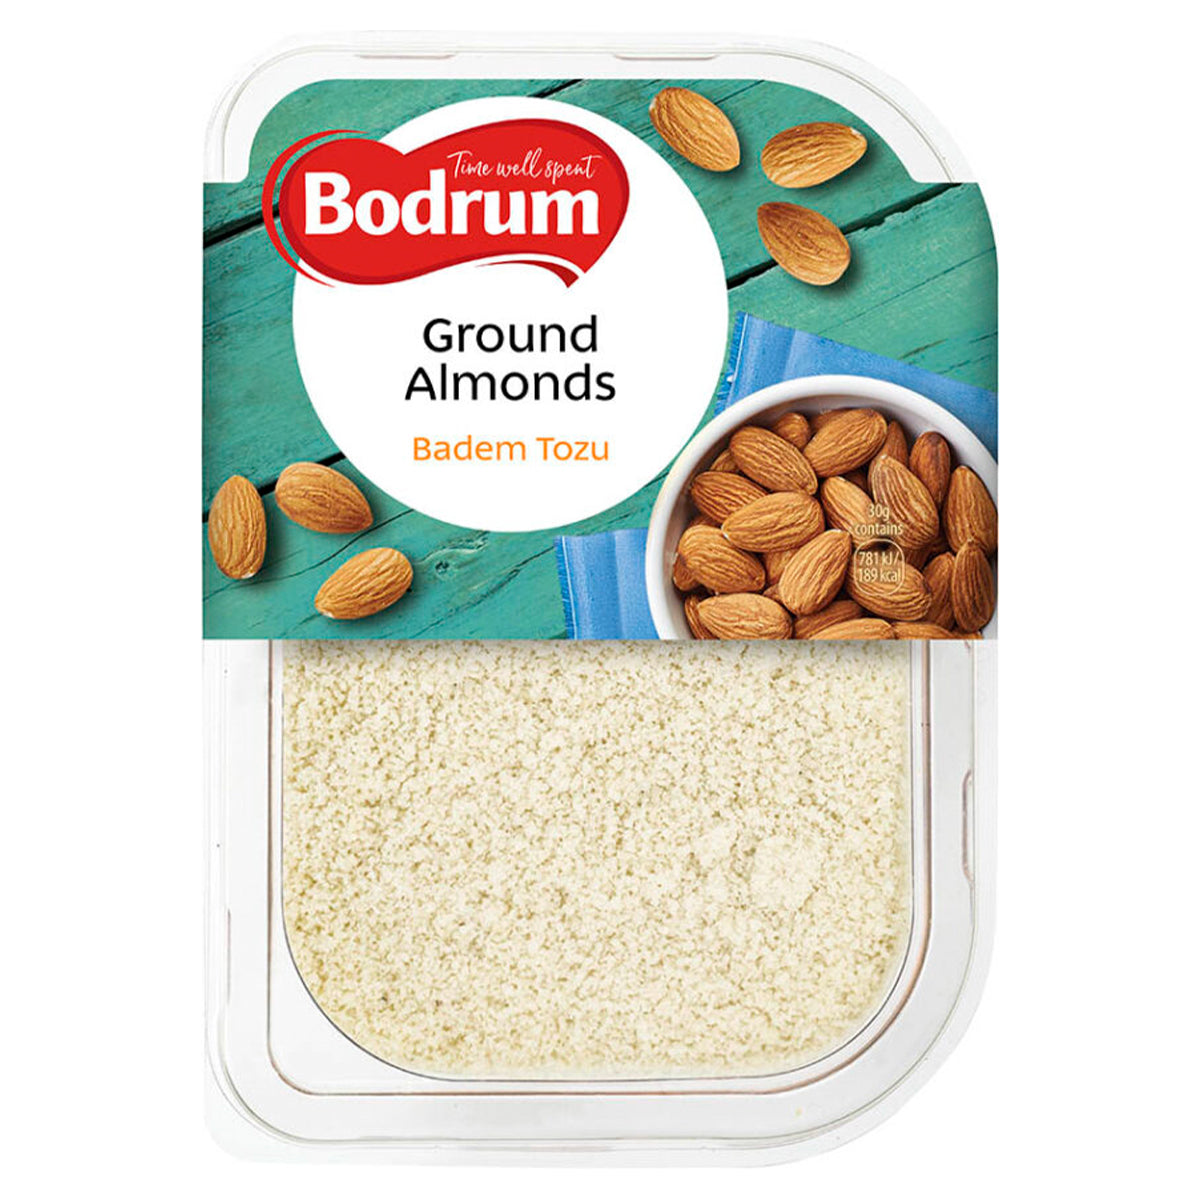 Bodrum grounded almonds in a plastic container.